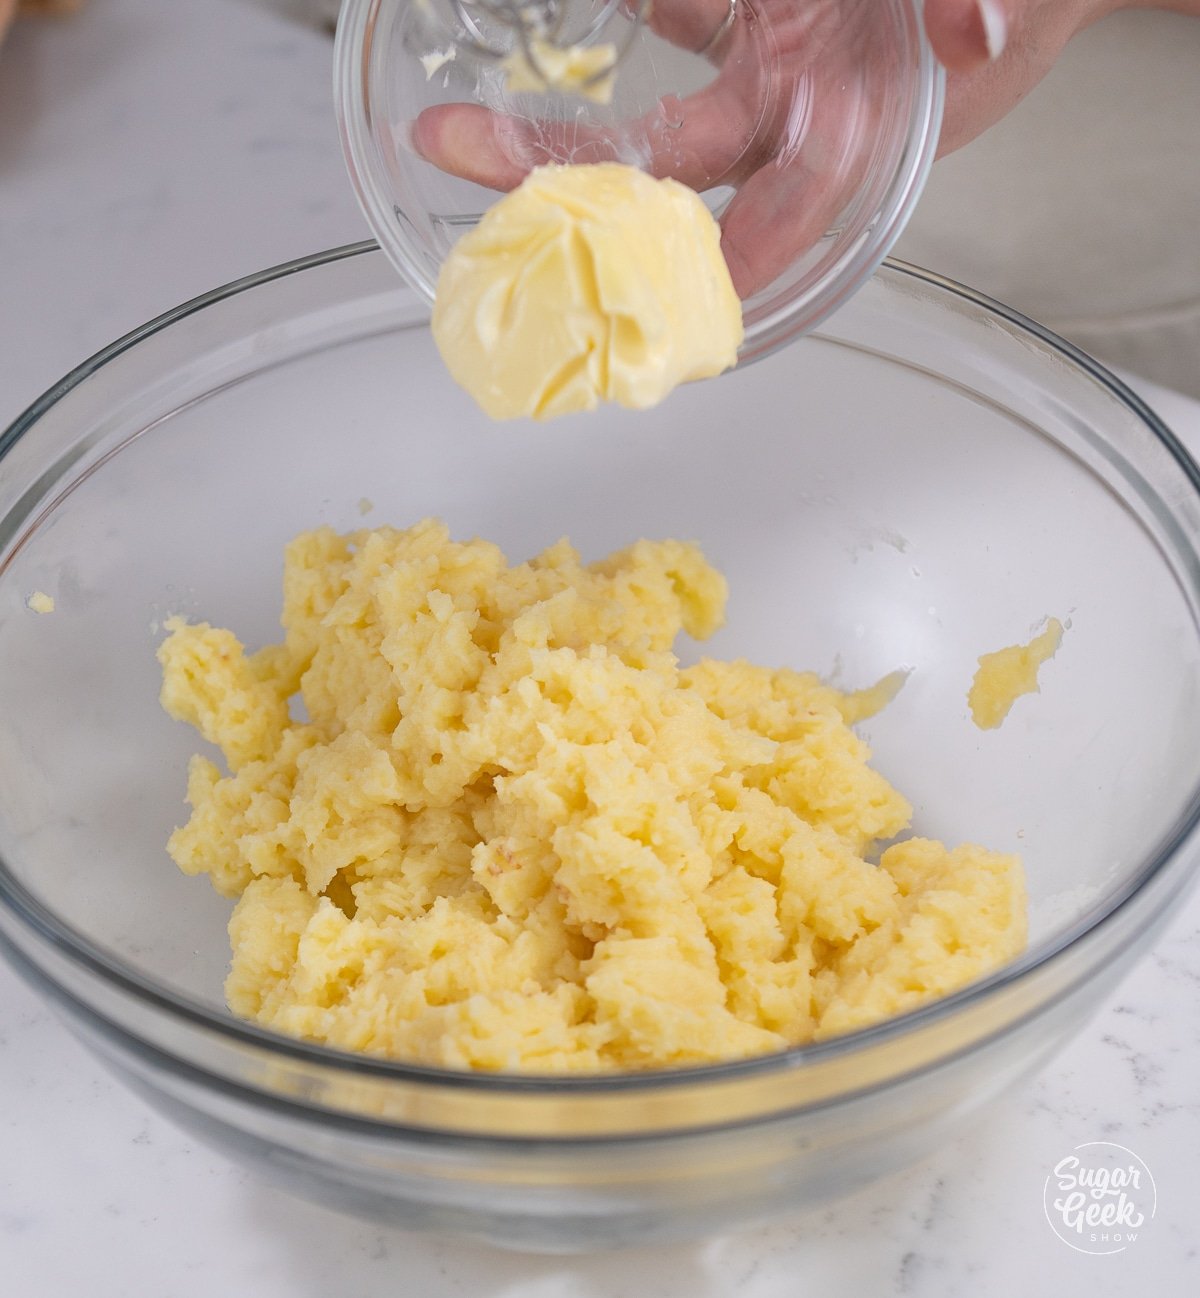 hand adding butter to pastry cream mixture in a bowl.